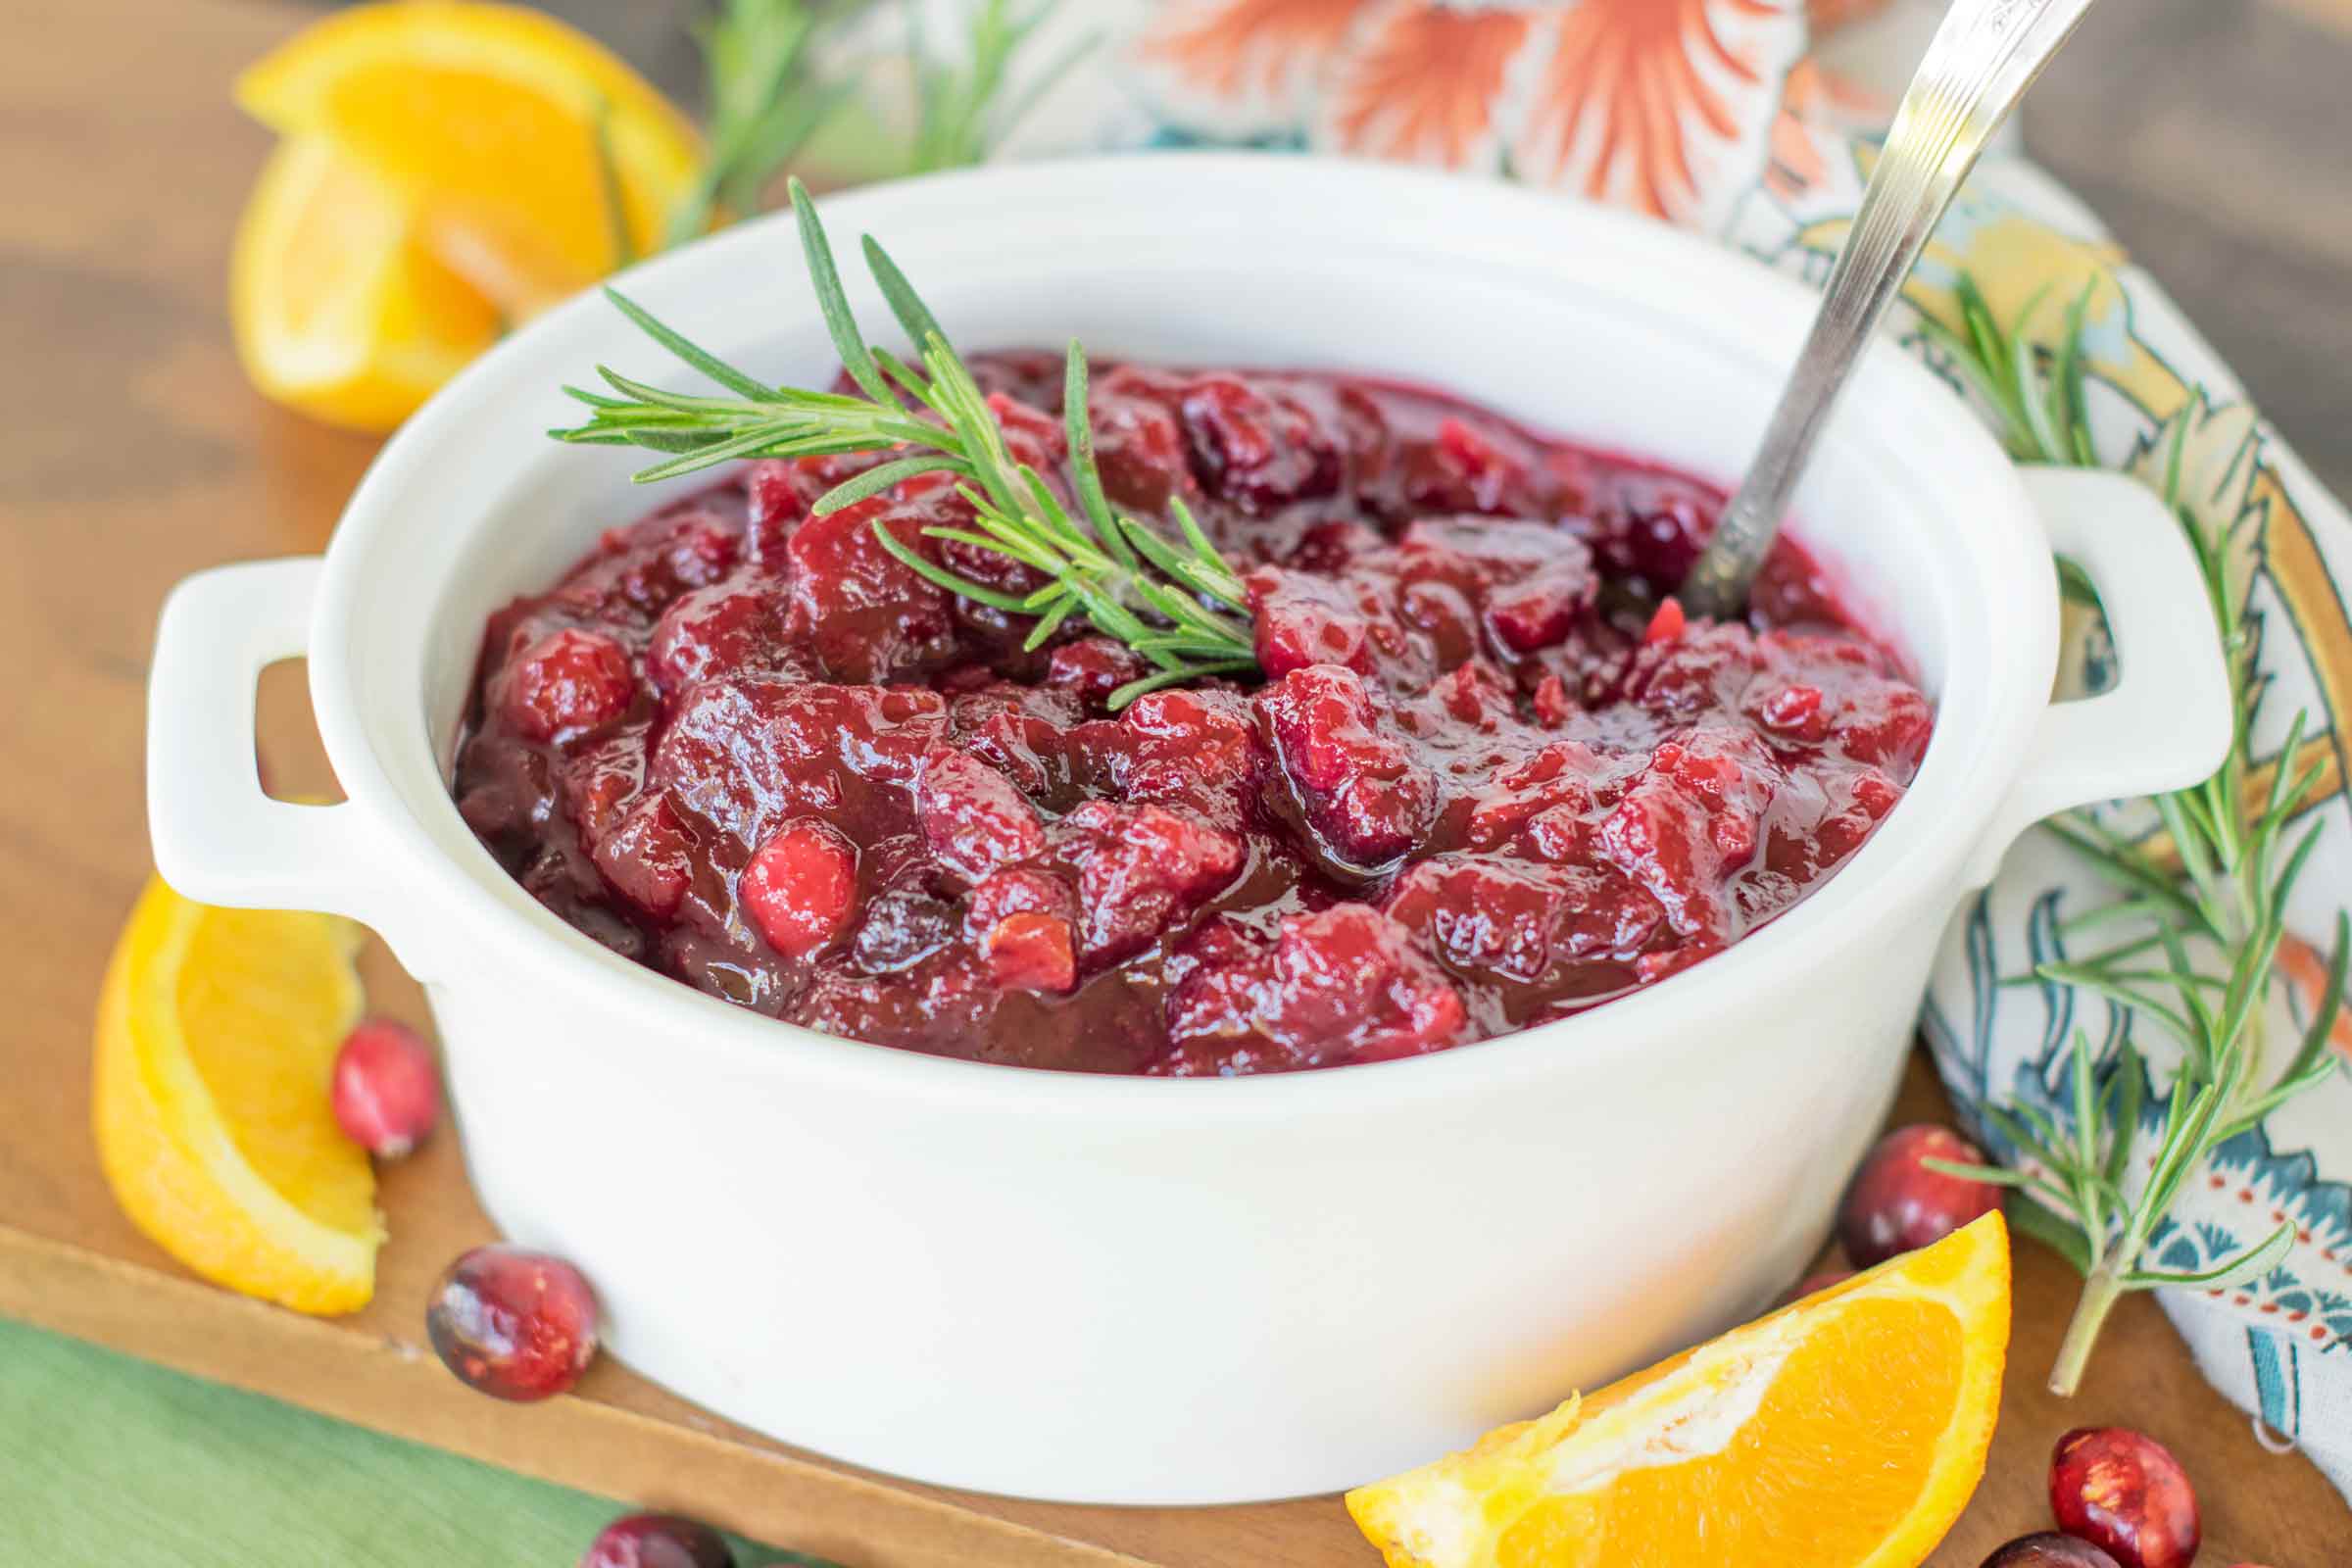 Jellied Cranberry Sauce - Beyond The Chicken Coop